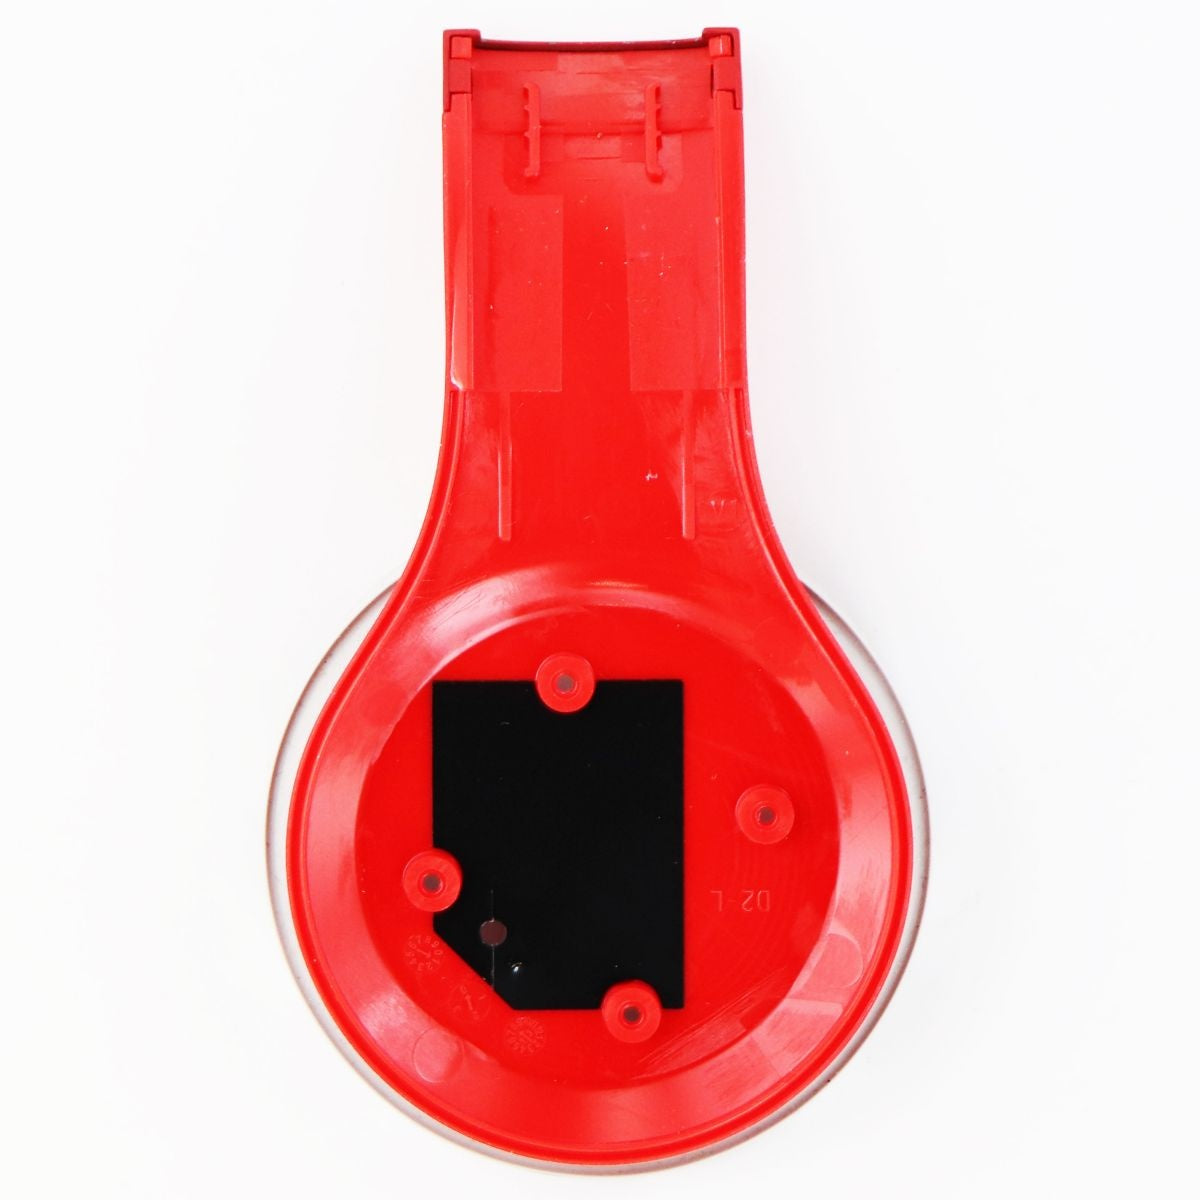 OEM Repair Part – Left Inner Housing Take Off From Beats Studio 2 - RED Cell Phone - Replacement Parts & Tools Beats by Dr. Dre    - Simple Cell Bulk Wholesale Pricing - USA Seller